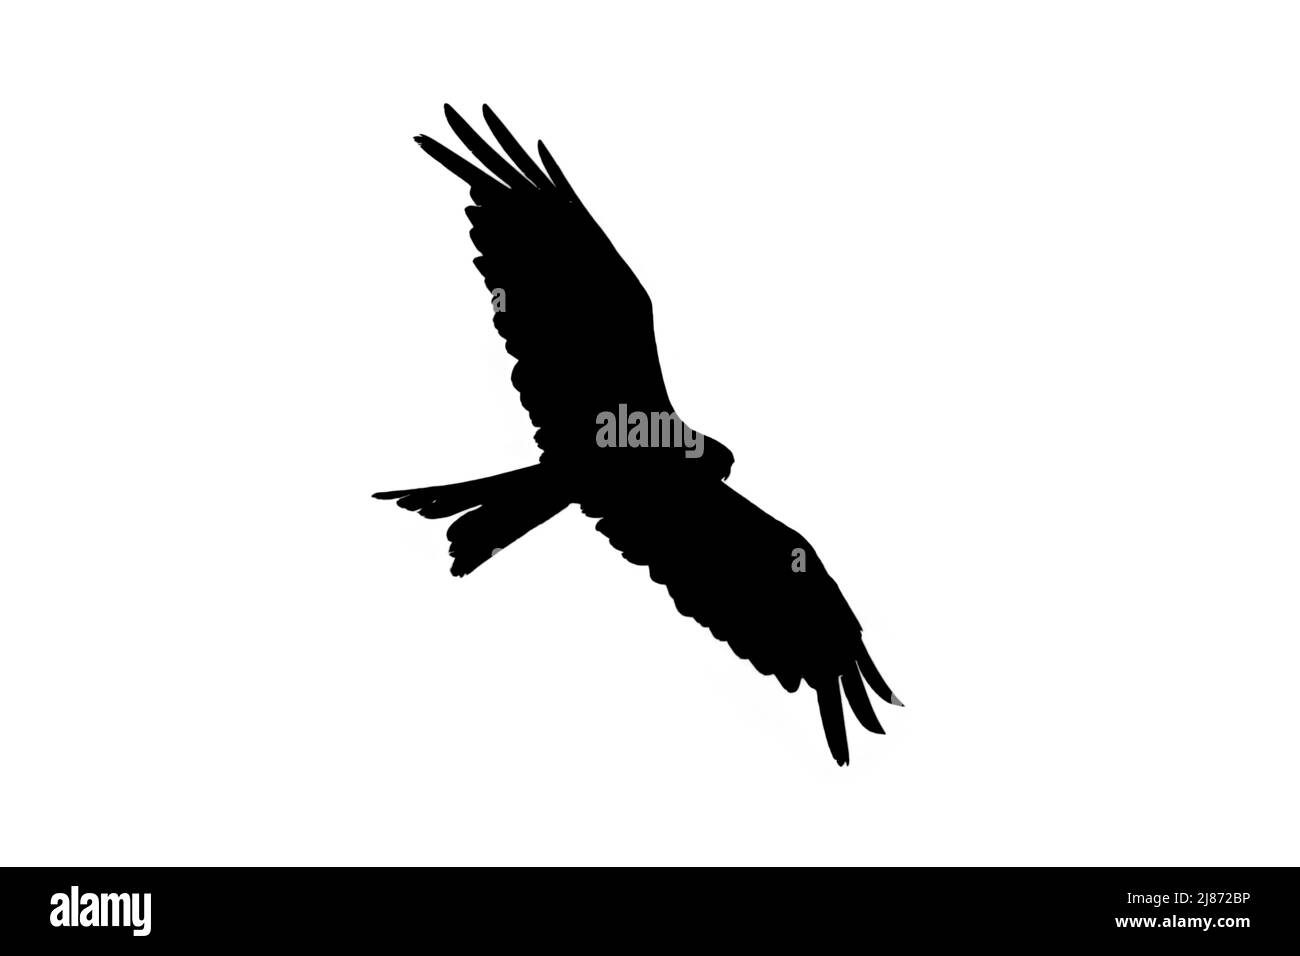 Silhouette of soaring red kite (Milvus milvus) in flight outlined against white background to show wings and tail shapes Stock Photo